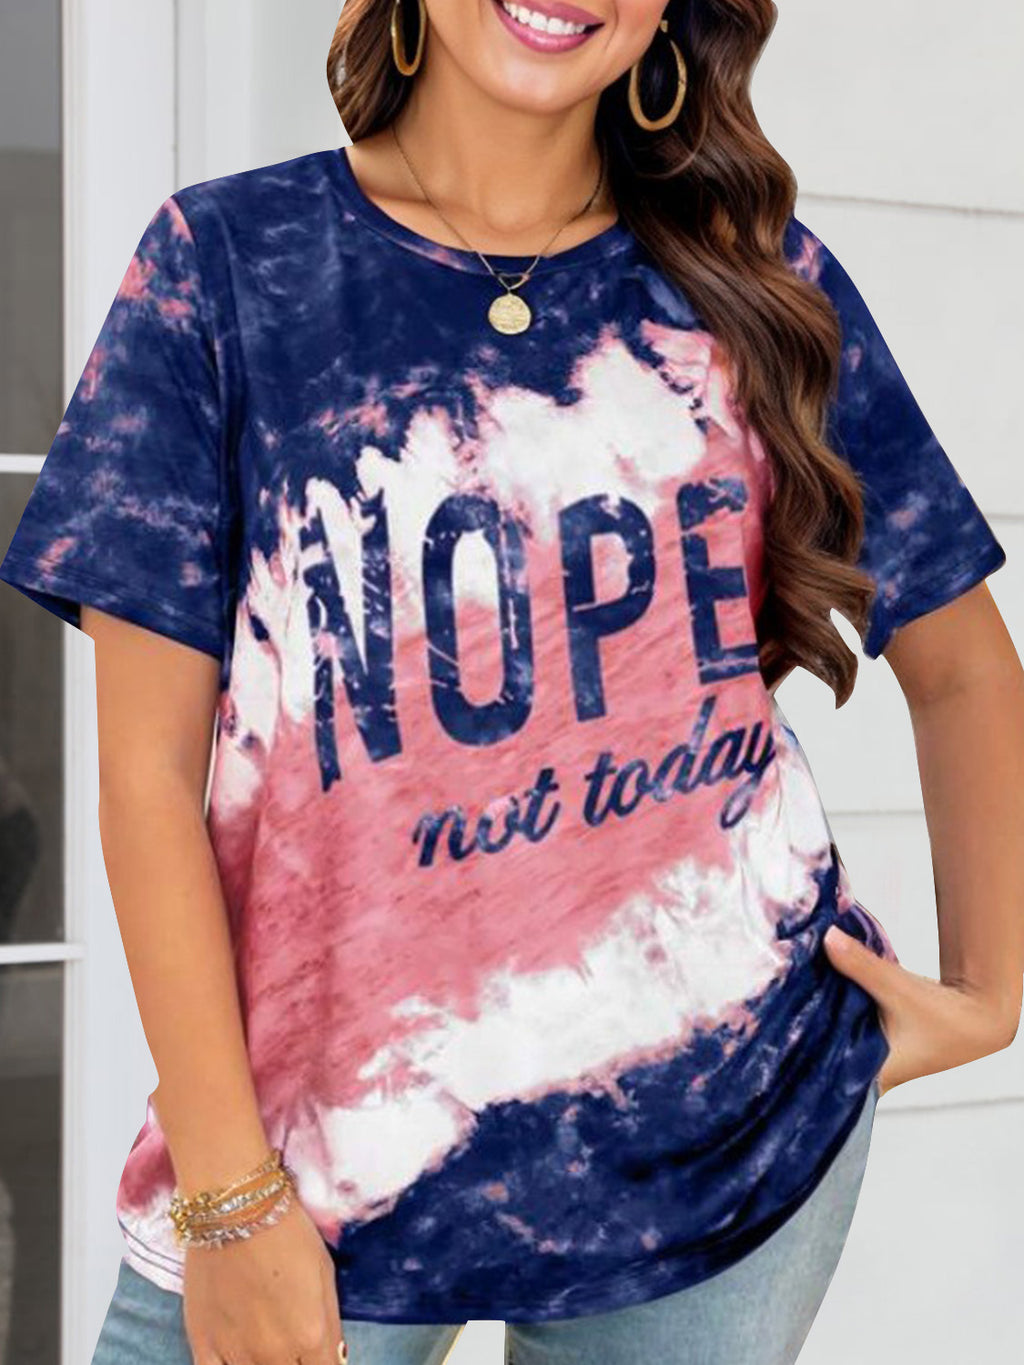 NOPE NOT TODAY Round Neck Short Sleeve T-Shirt Shirts & Tops Krazy Heart Designs Boutique Navy S 